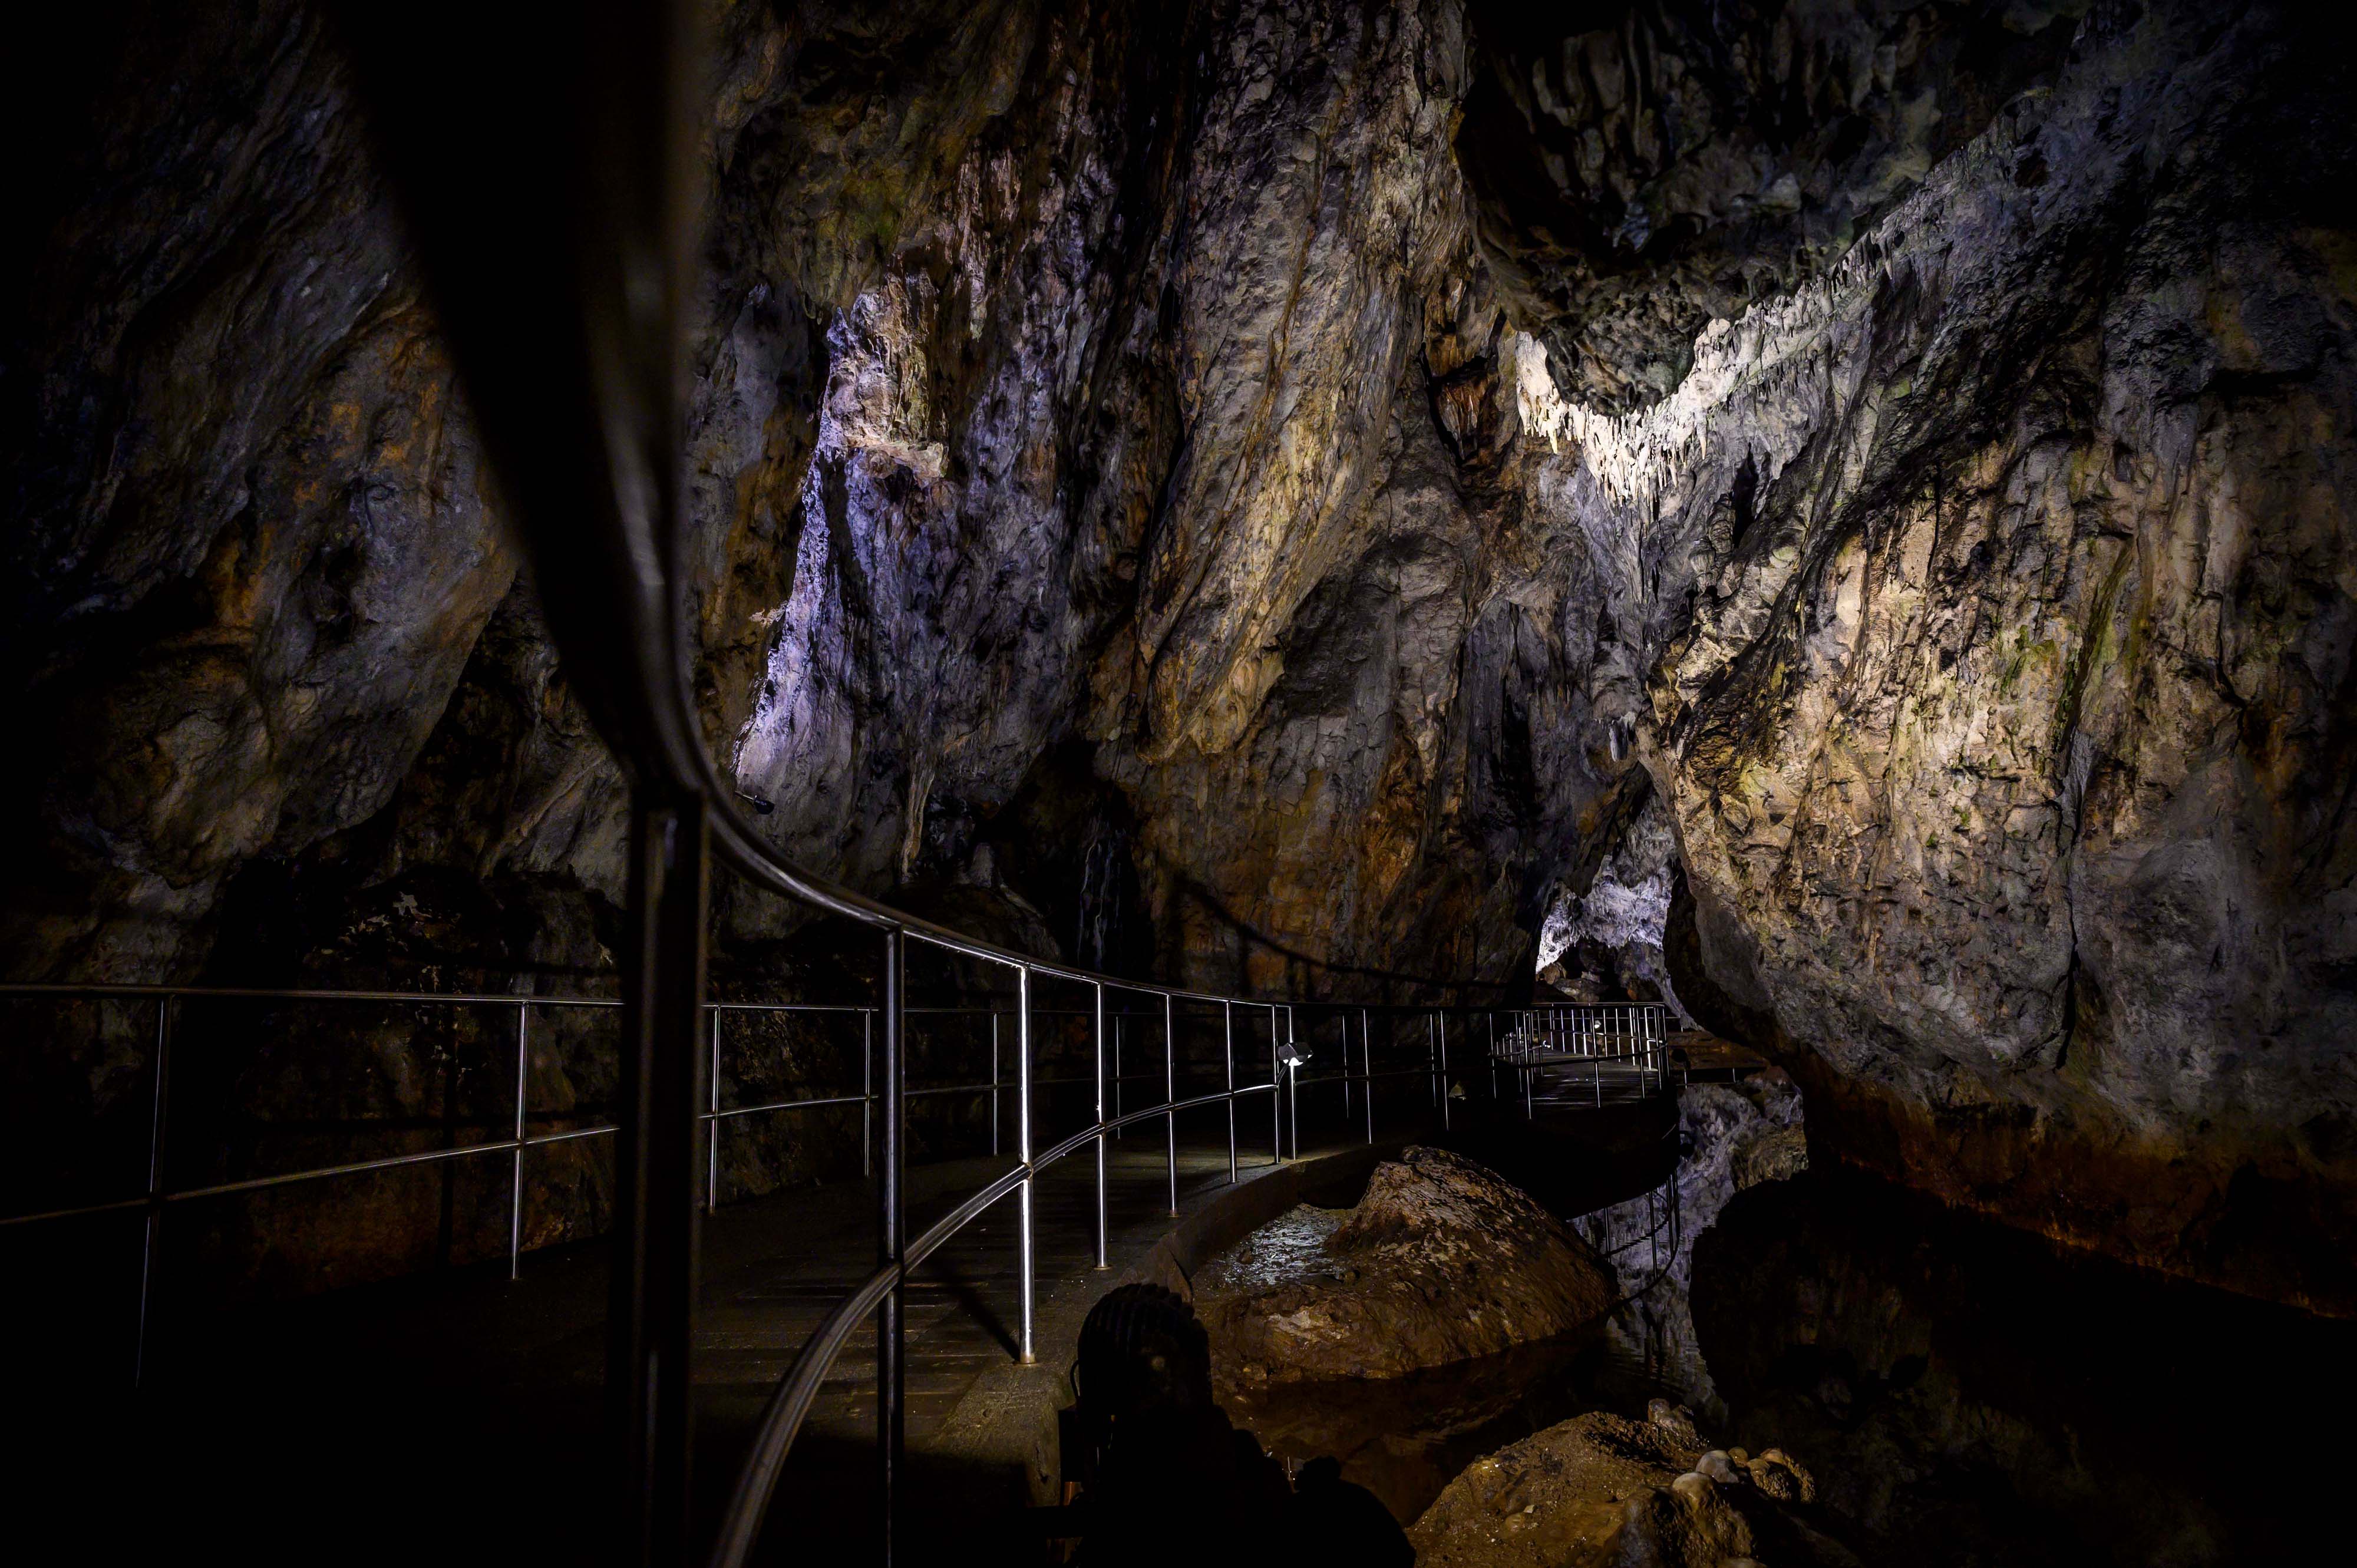 Medical/wellness tourism development in the world heritage caves of the Aggtelek and Slovak Karst